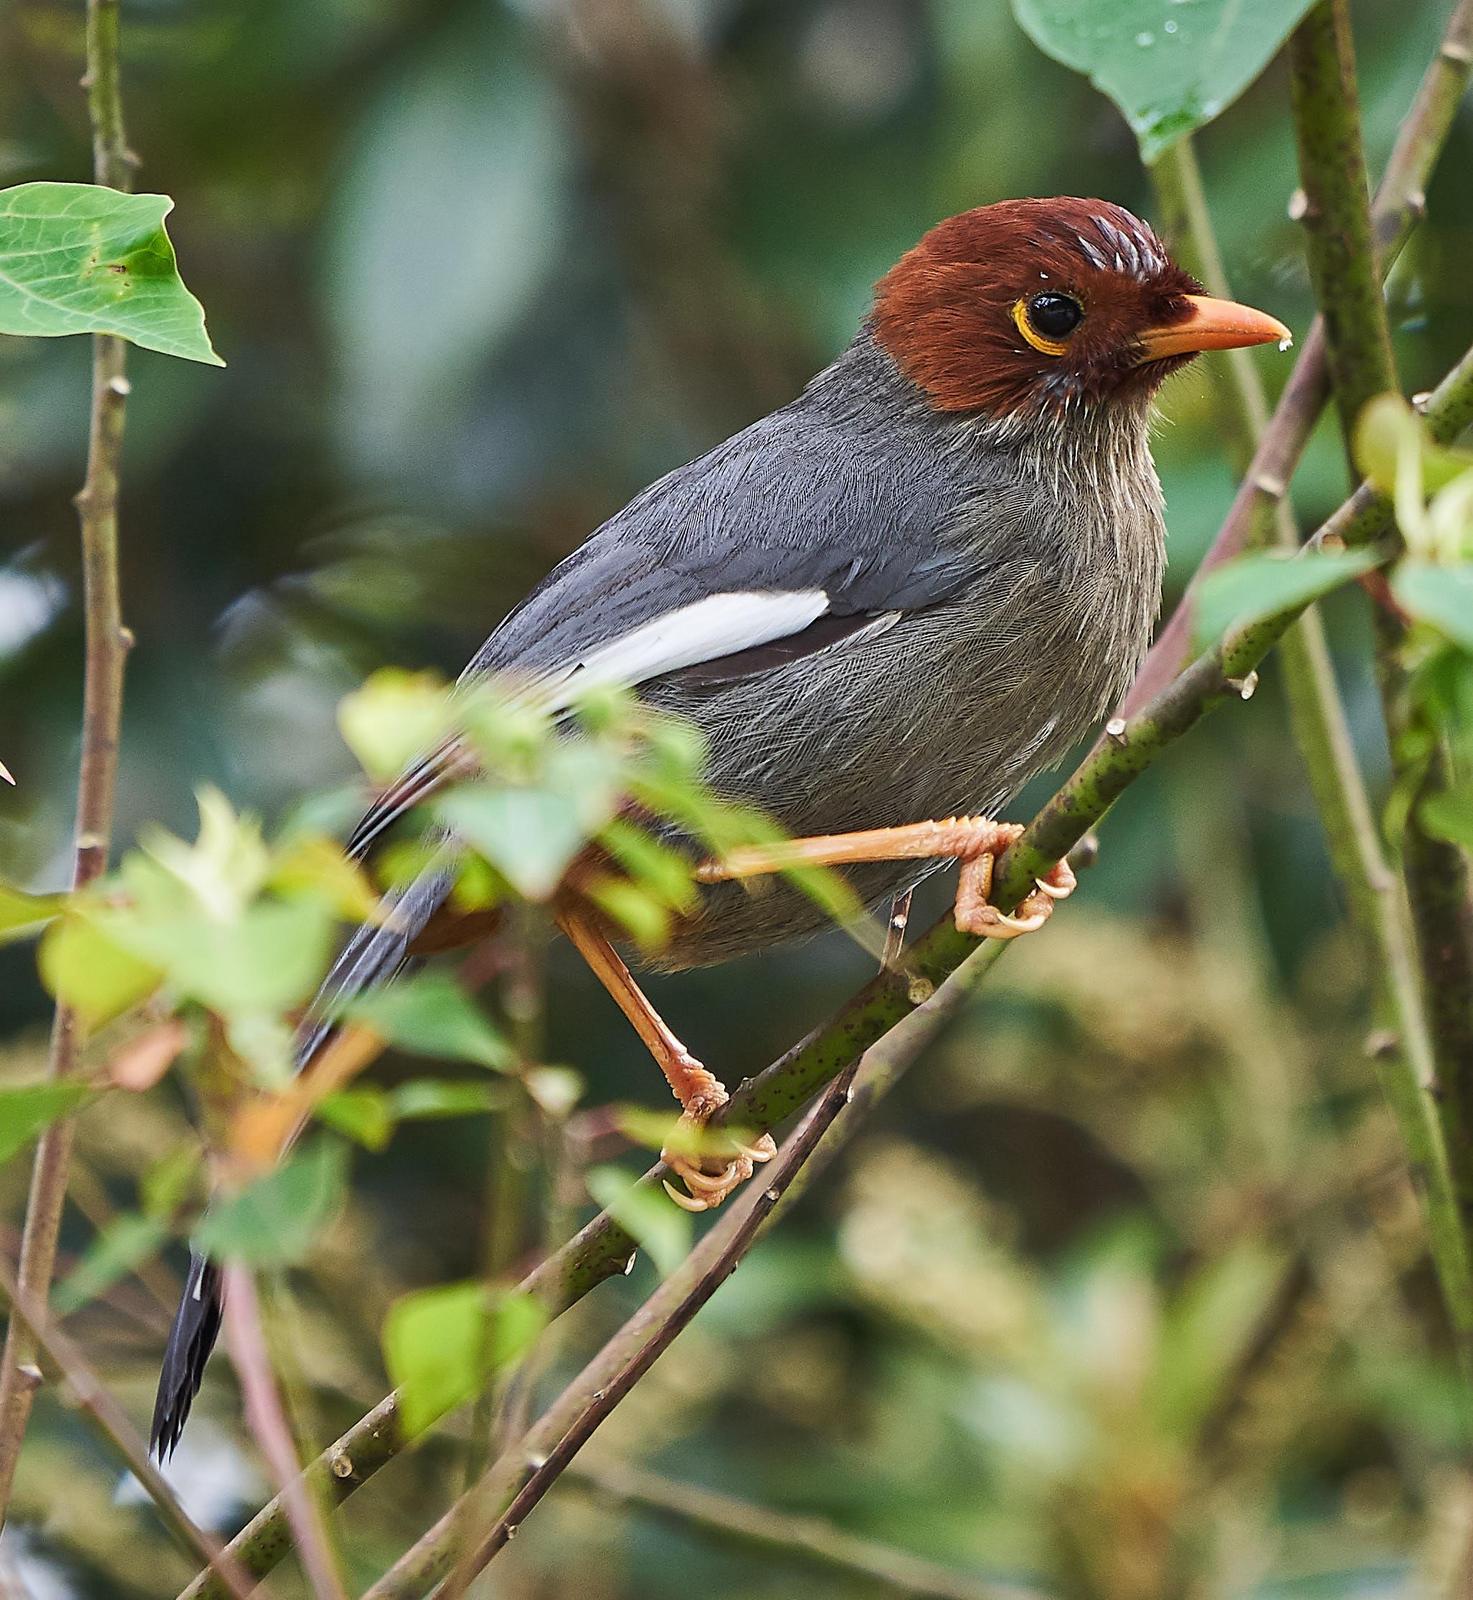 Chestnut-hooded Laughingthrush Photo by Steven Cheong